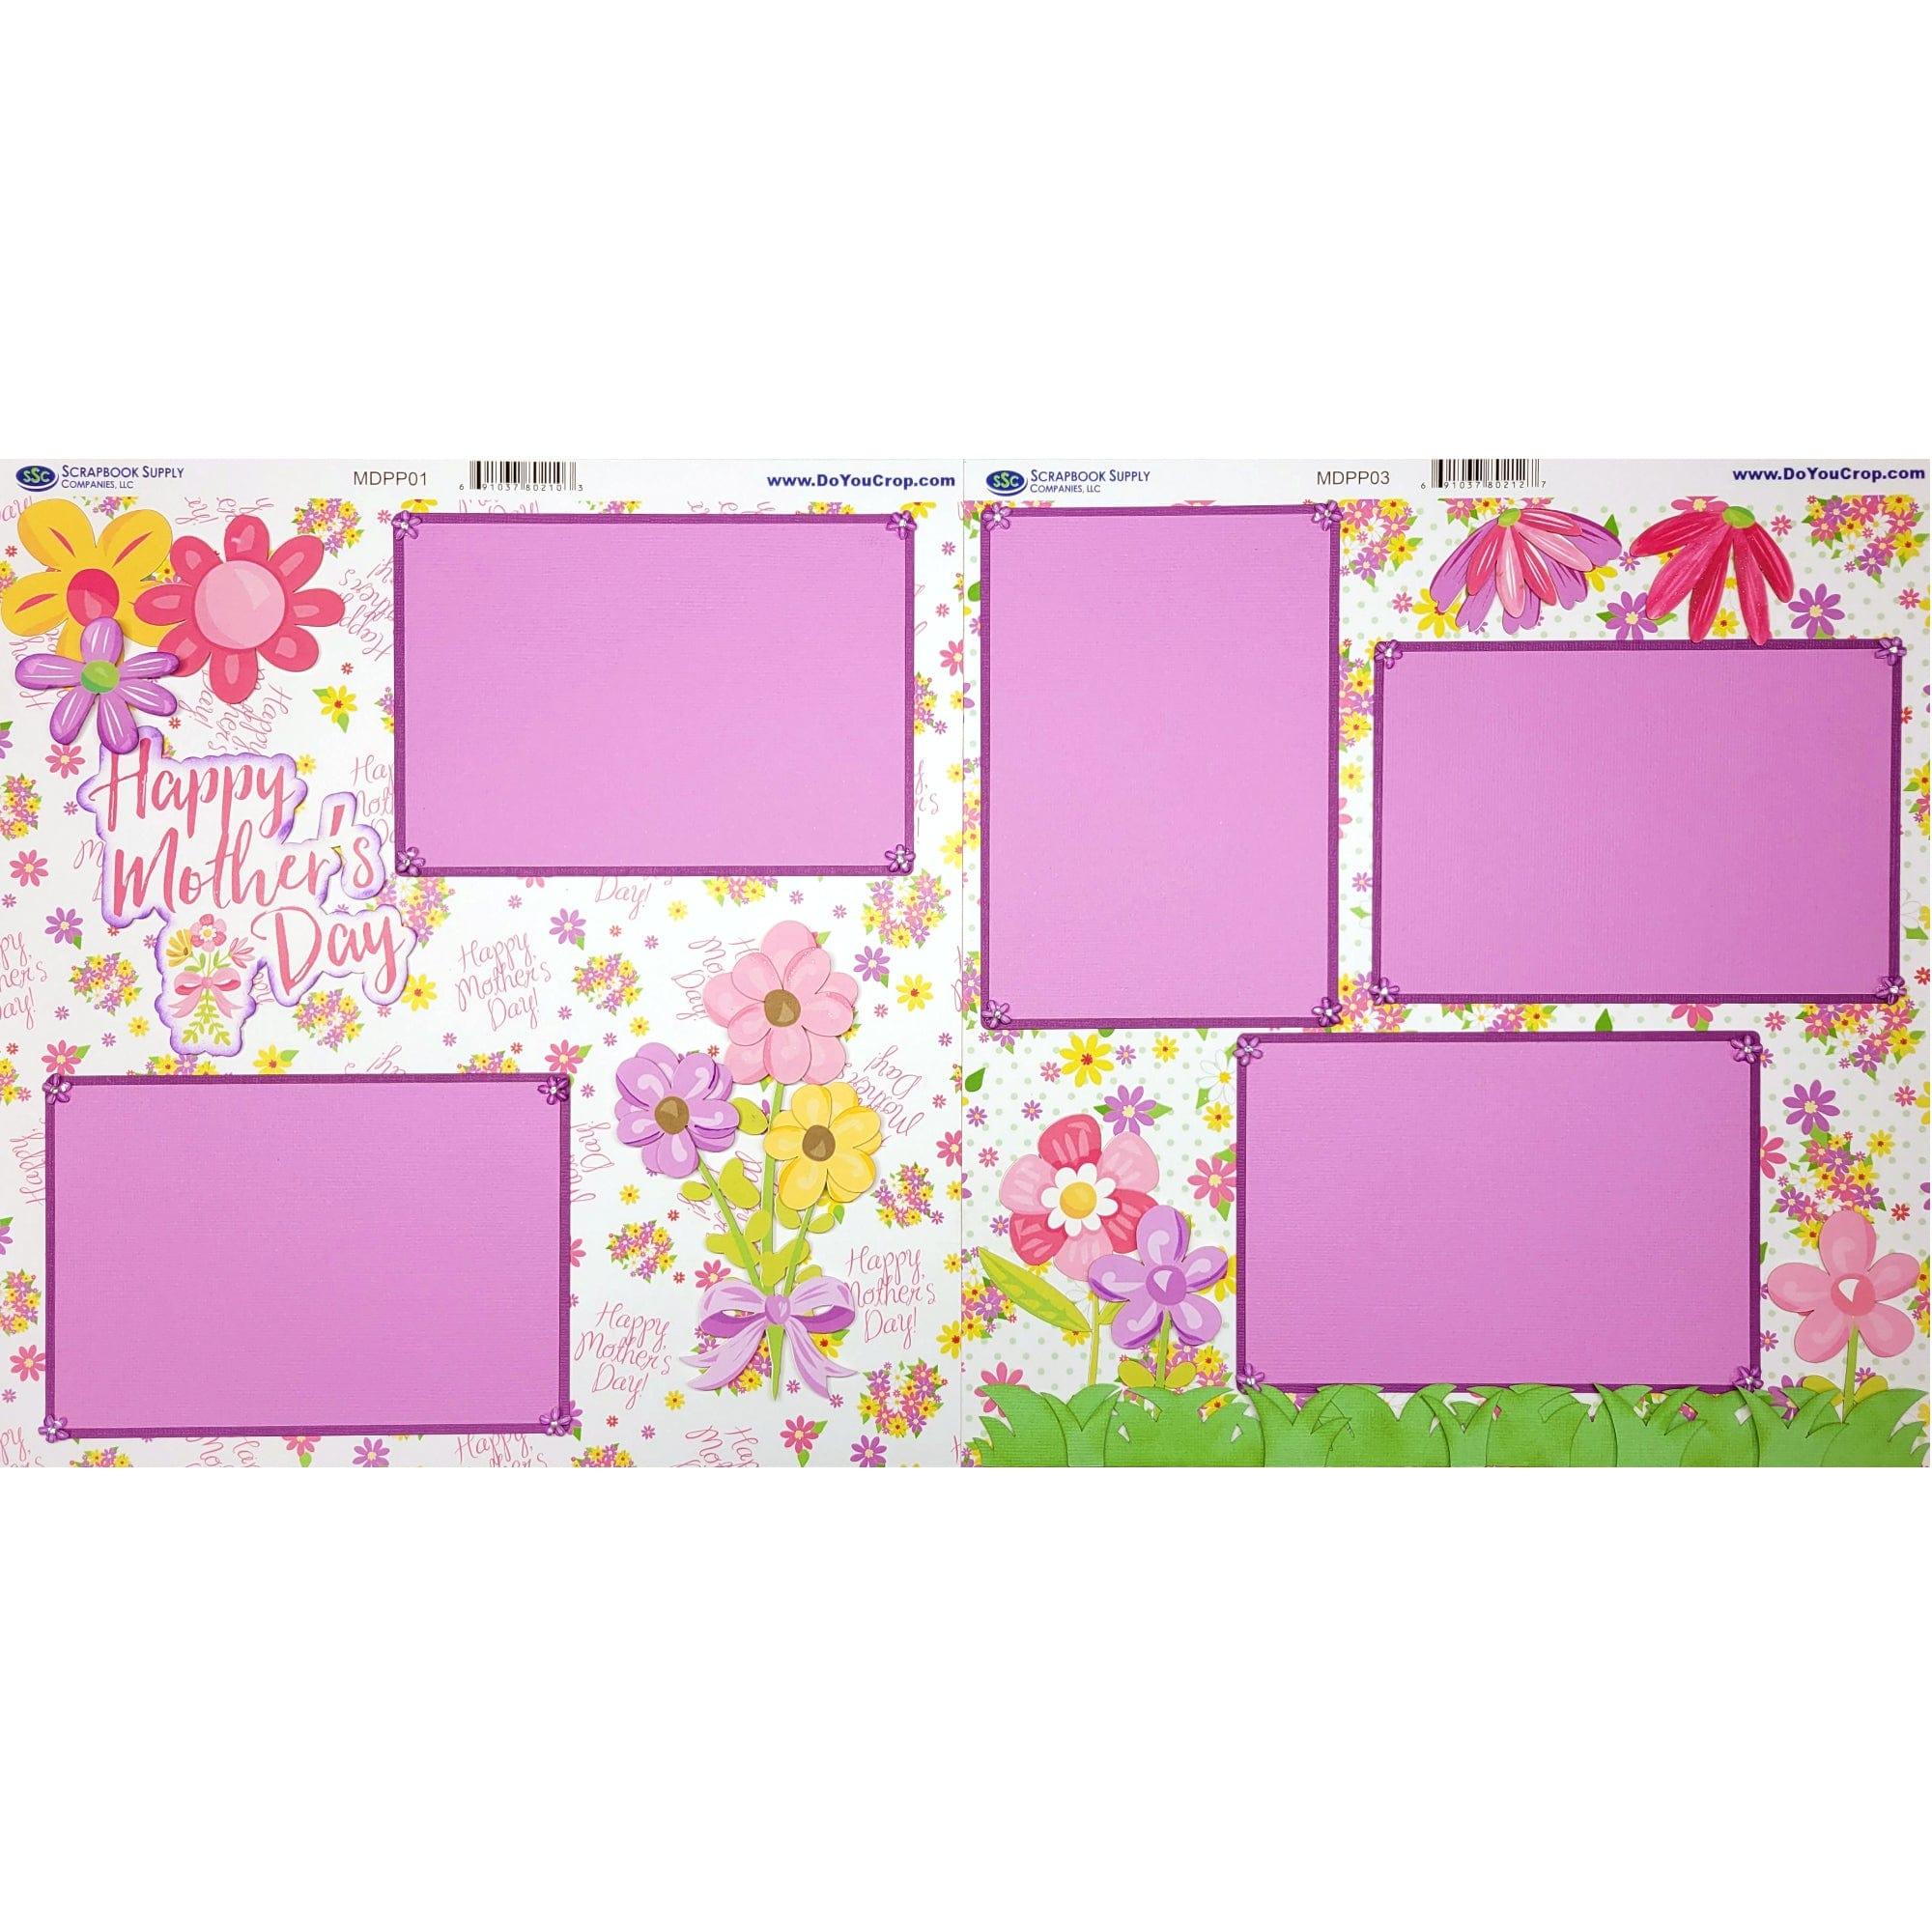 Happy Mother's Day (2) - 12 x 12 Pages, Fully-Assembled & Hand-Embellished Dimensional Scrapbook Premade by SSC Designs